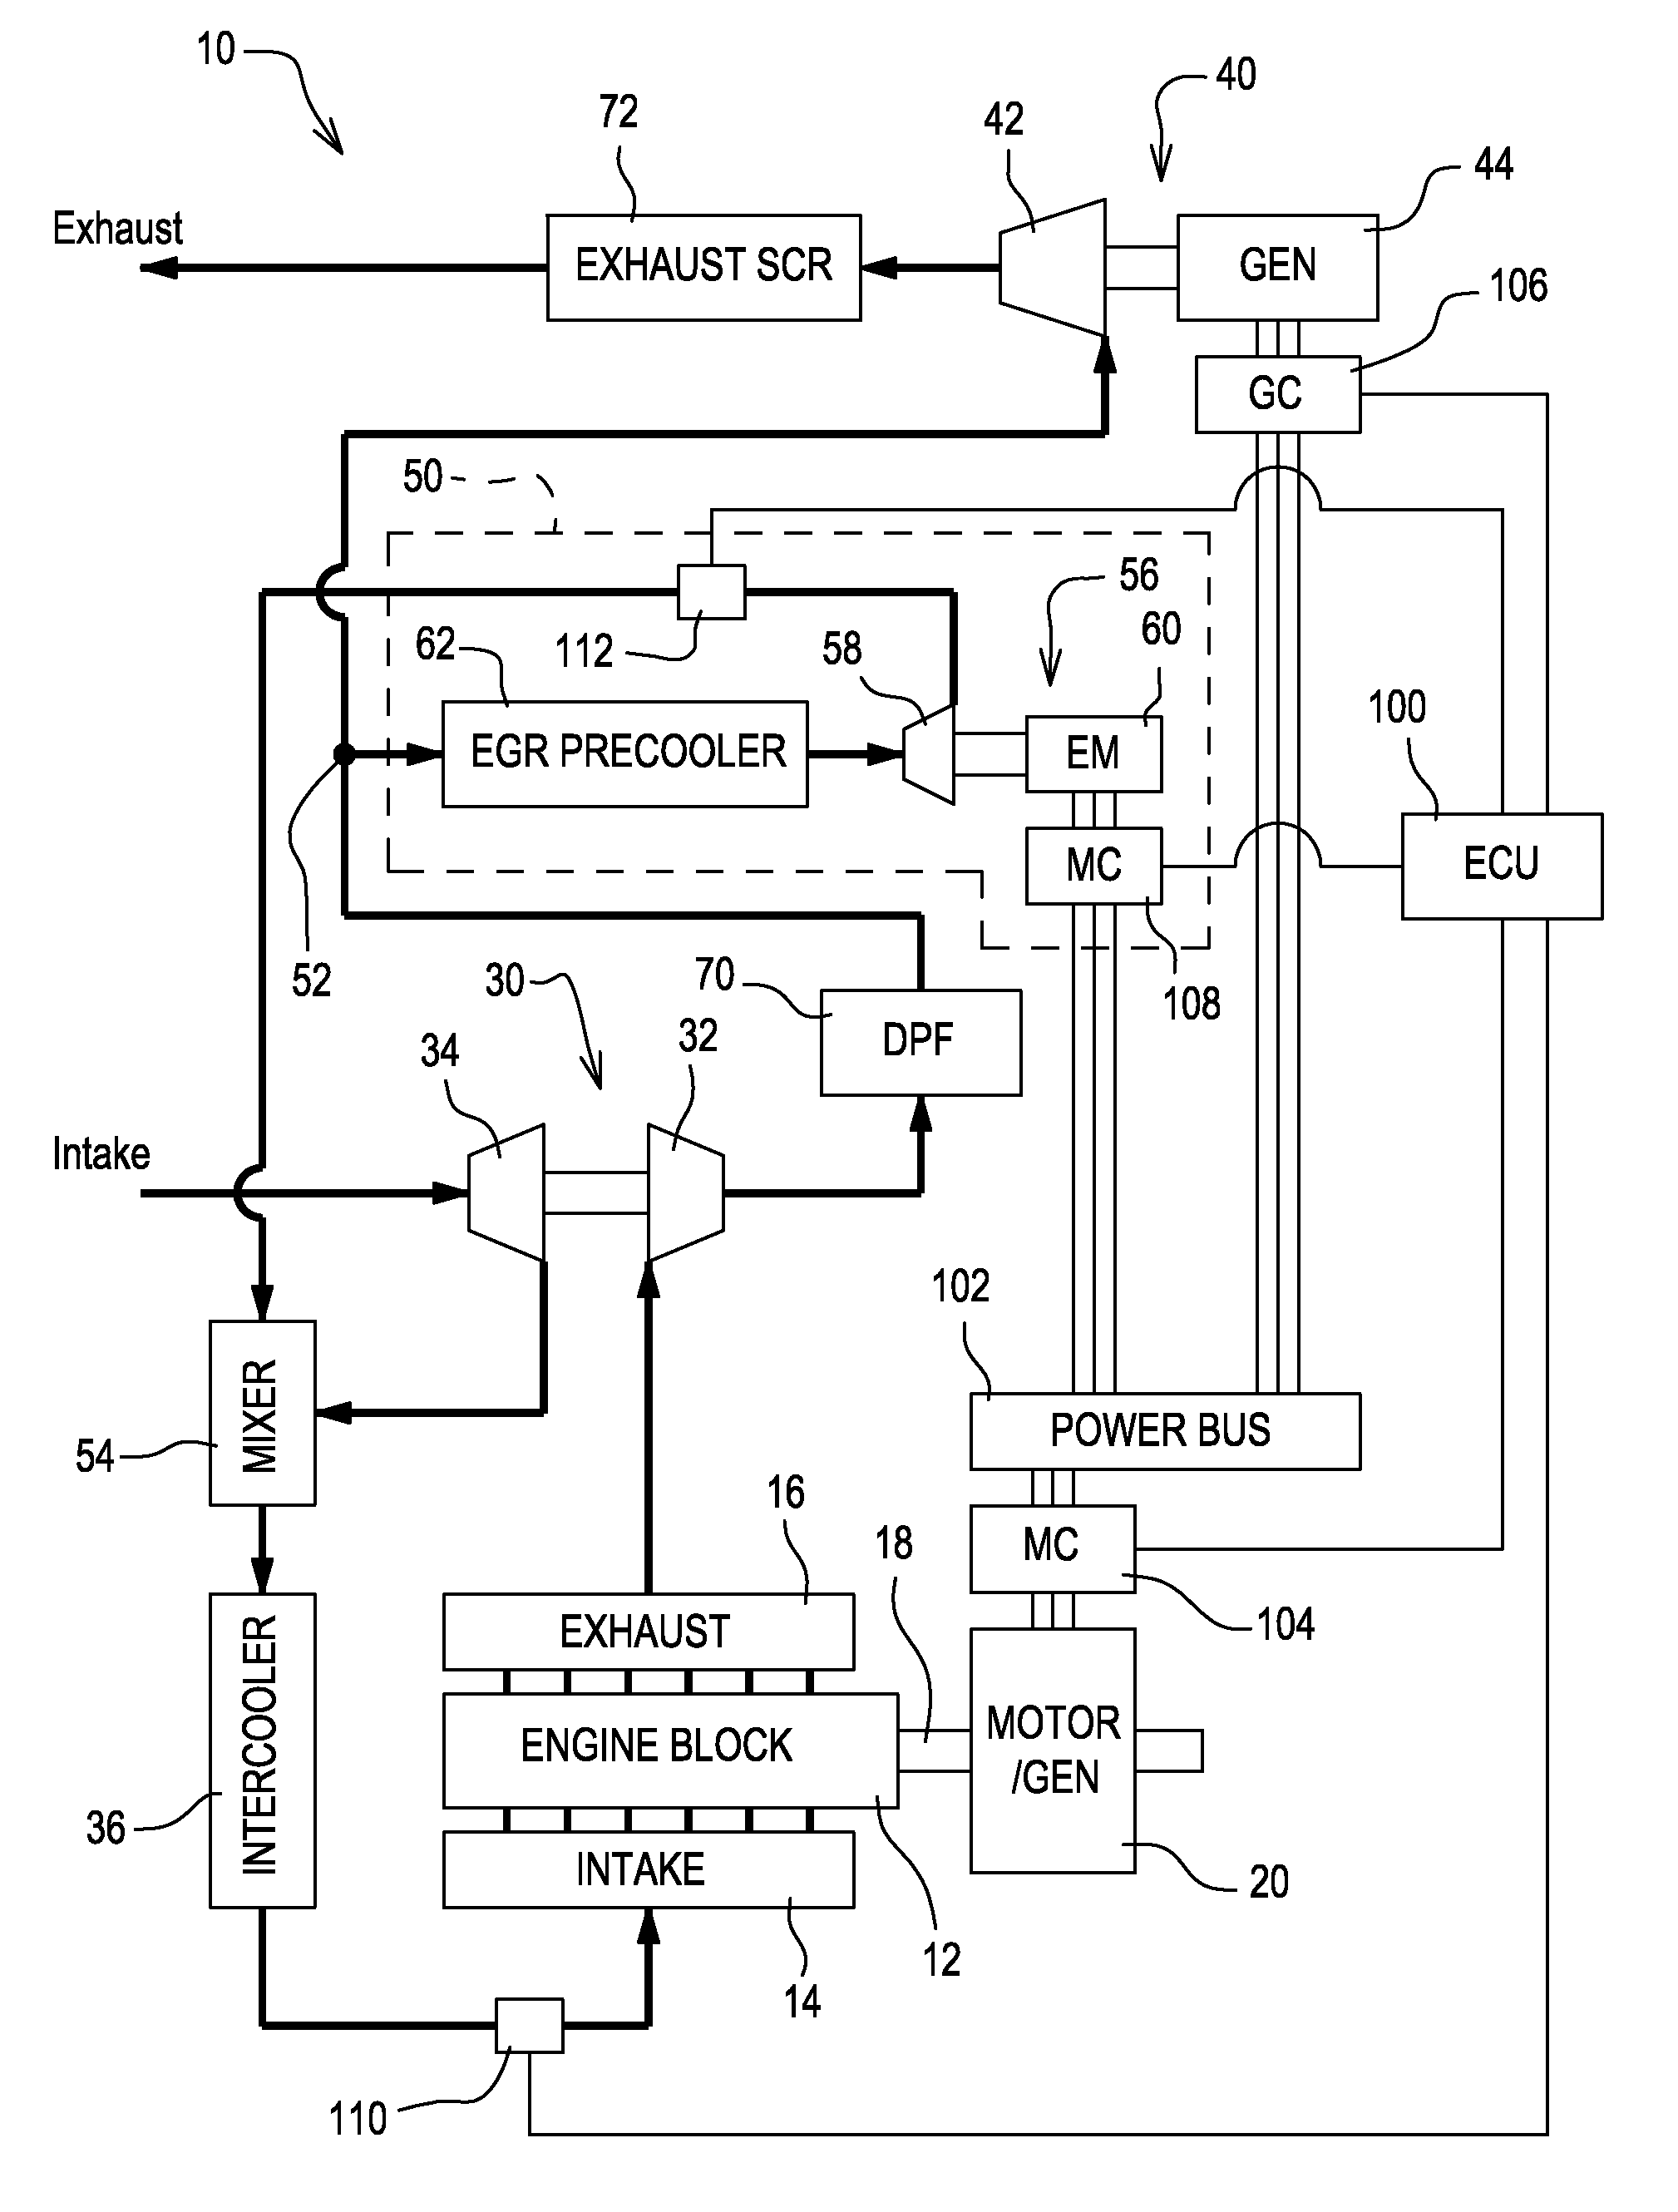 Metering exhaust gas recirculation system for a turbocharged engine having a turbogenerator system